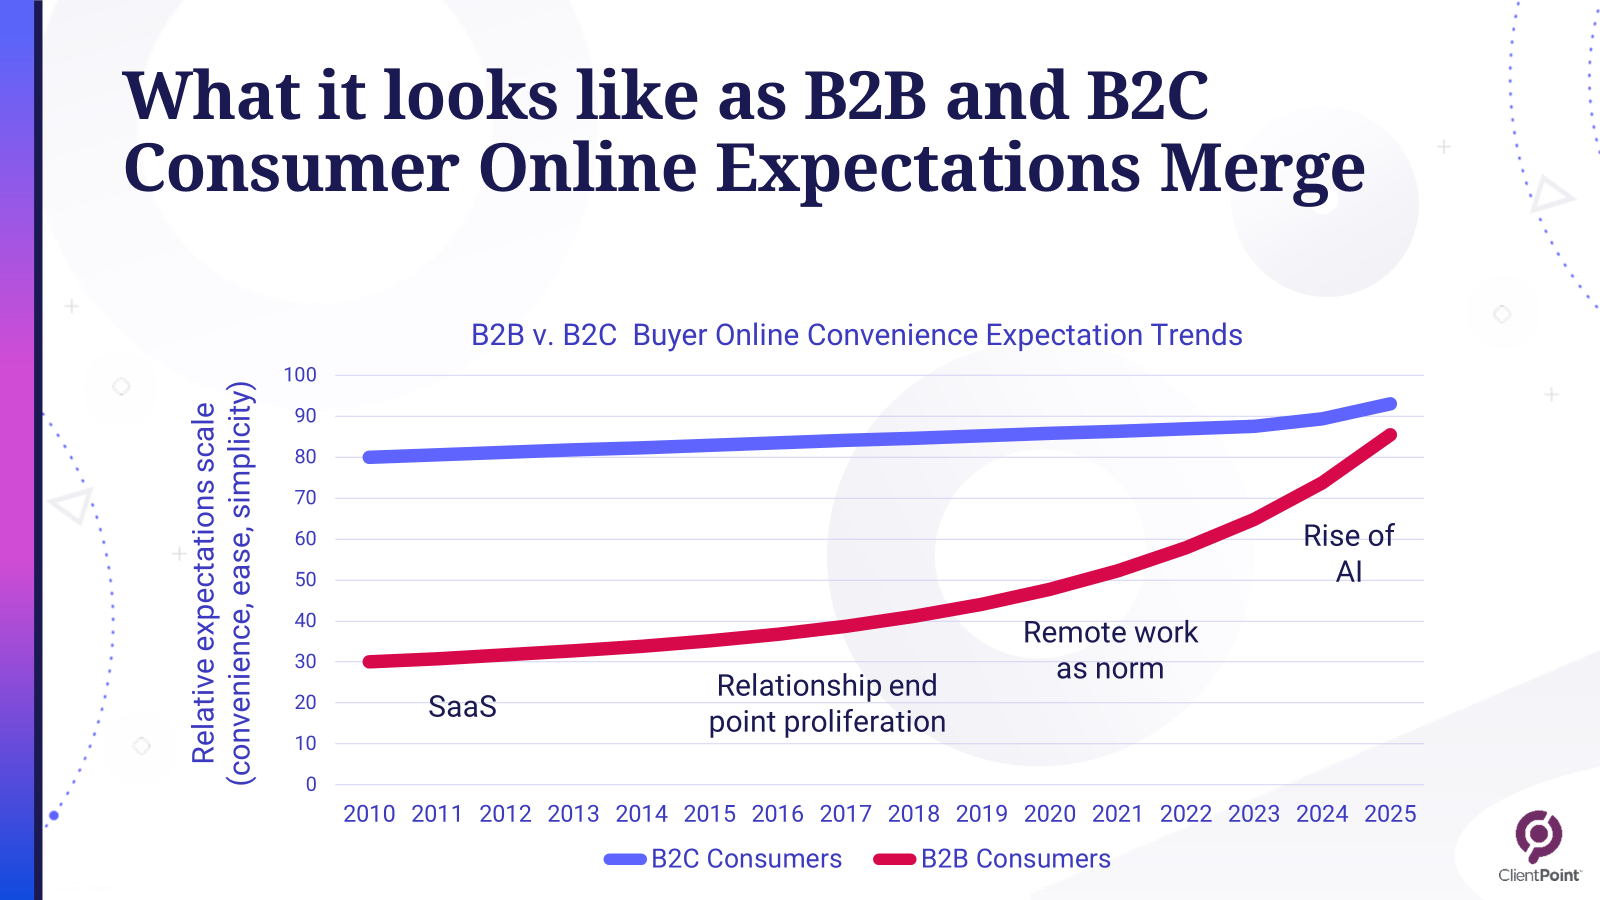 What it looks like as B2B and B2C Consumer Online Expectations Merge